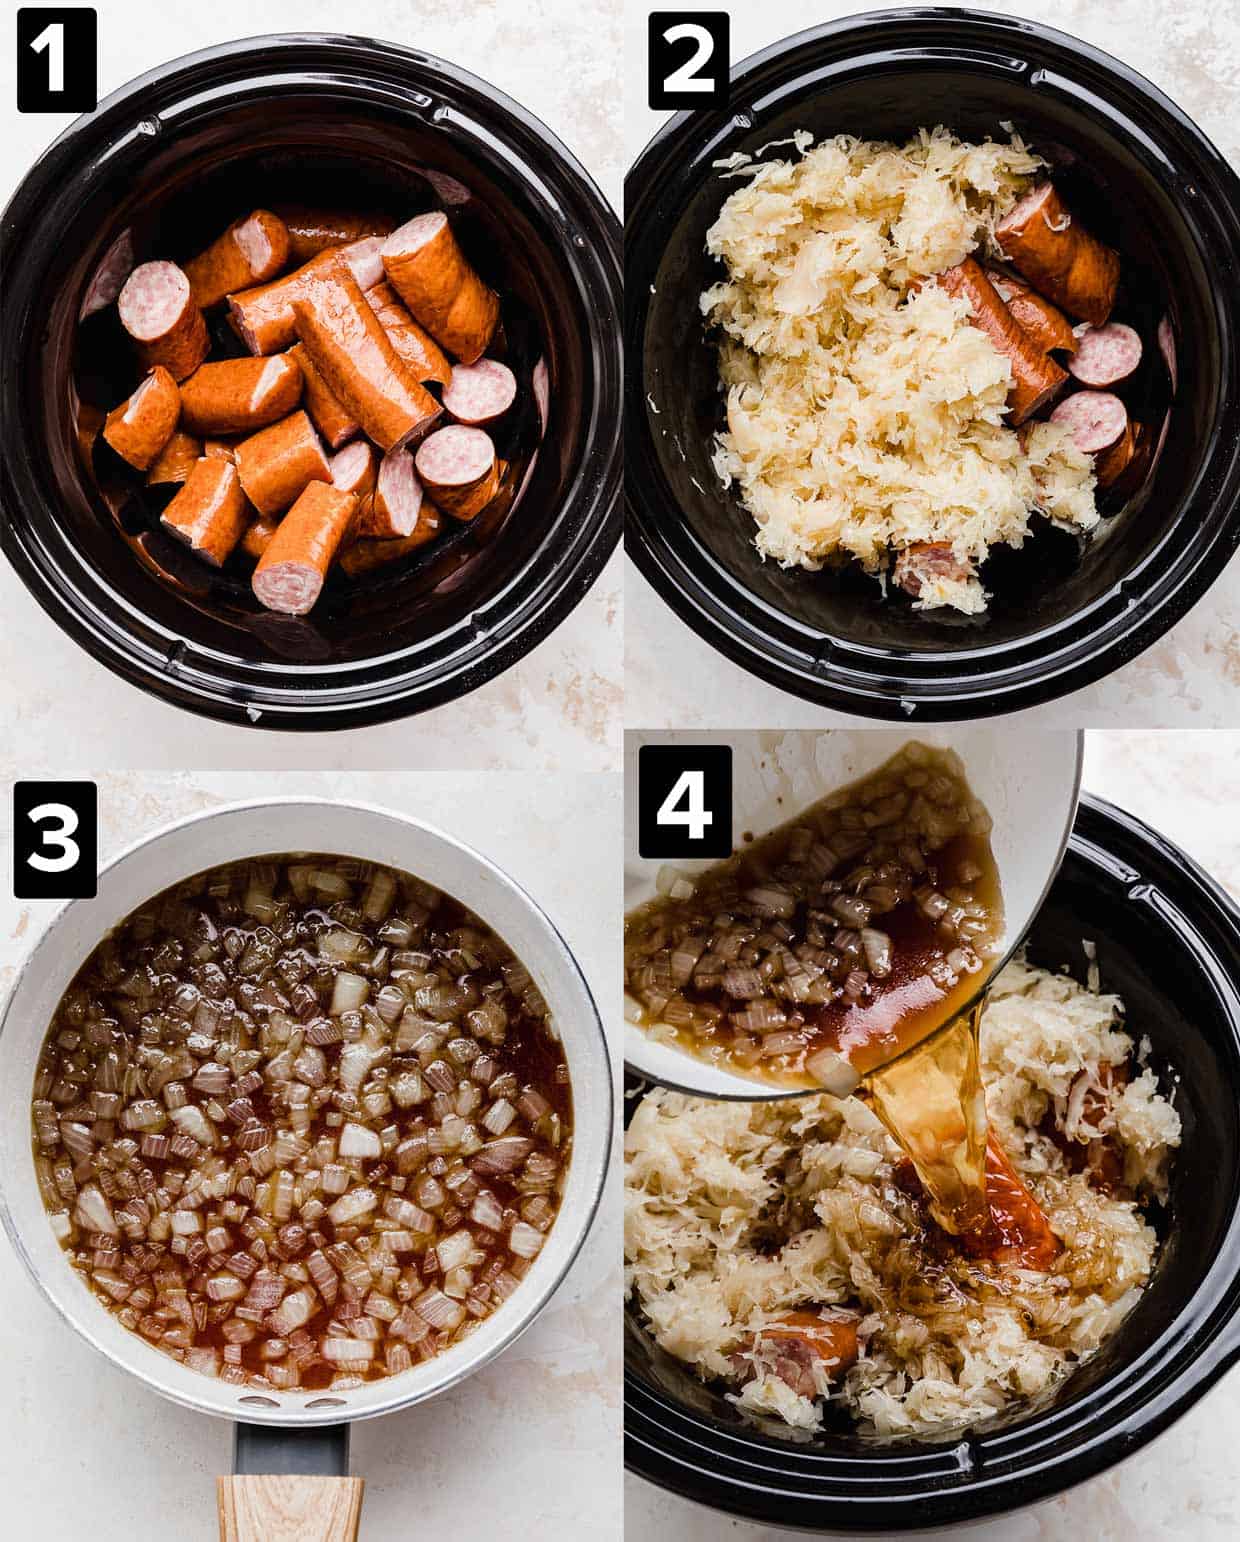 Four images showing the making of Crock Pot Kielbasa and Sauerkraut in a black slow cooker.